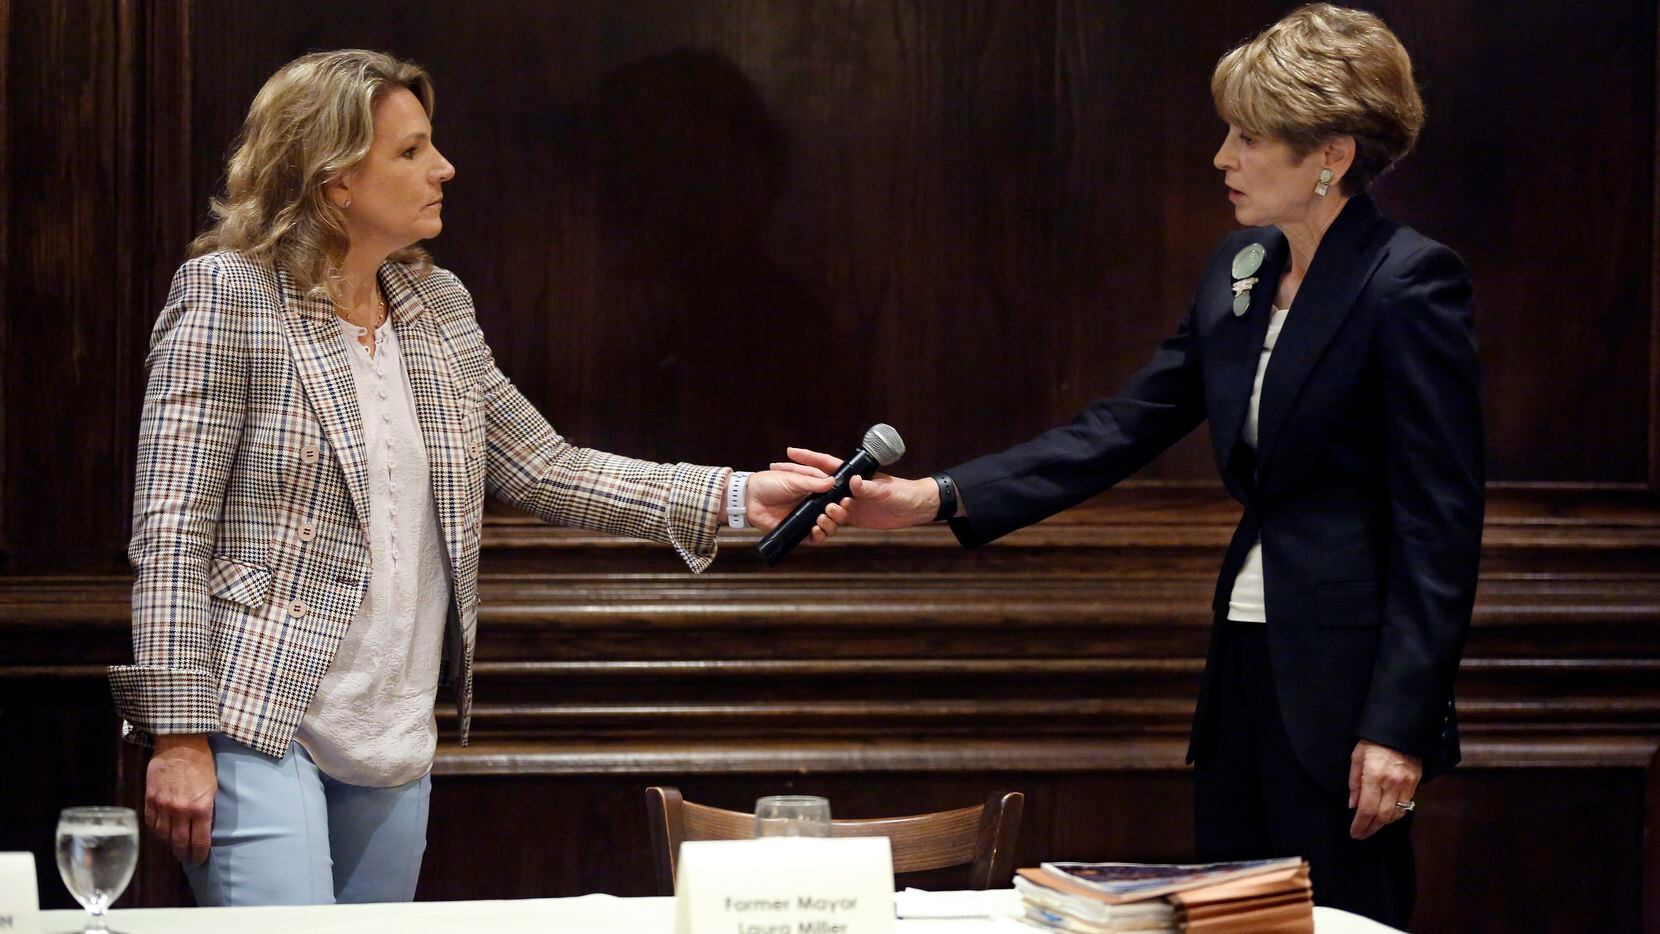 Dallas City Councilwoman Jennifer Staubach Gates (left) hands the microphone to former Dallas Mayor Laura Miller during a debate hosted by Dallas Builders Association at Maggiano's Little Italy - NorthPark in Dallas, Thursday, April 4, 2019. The two are vying for the District 13 seat held by Gates. 